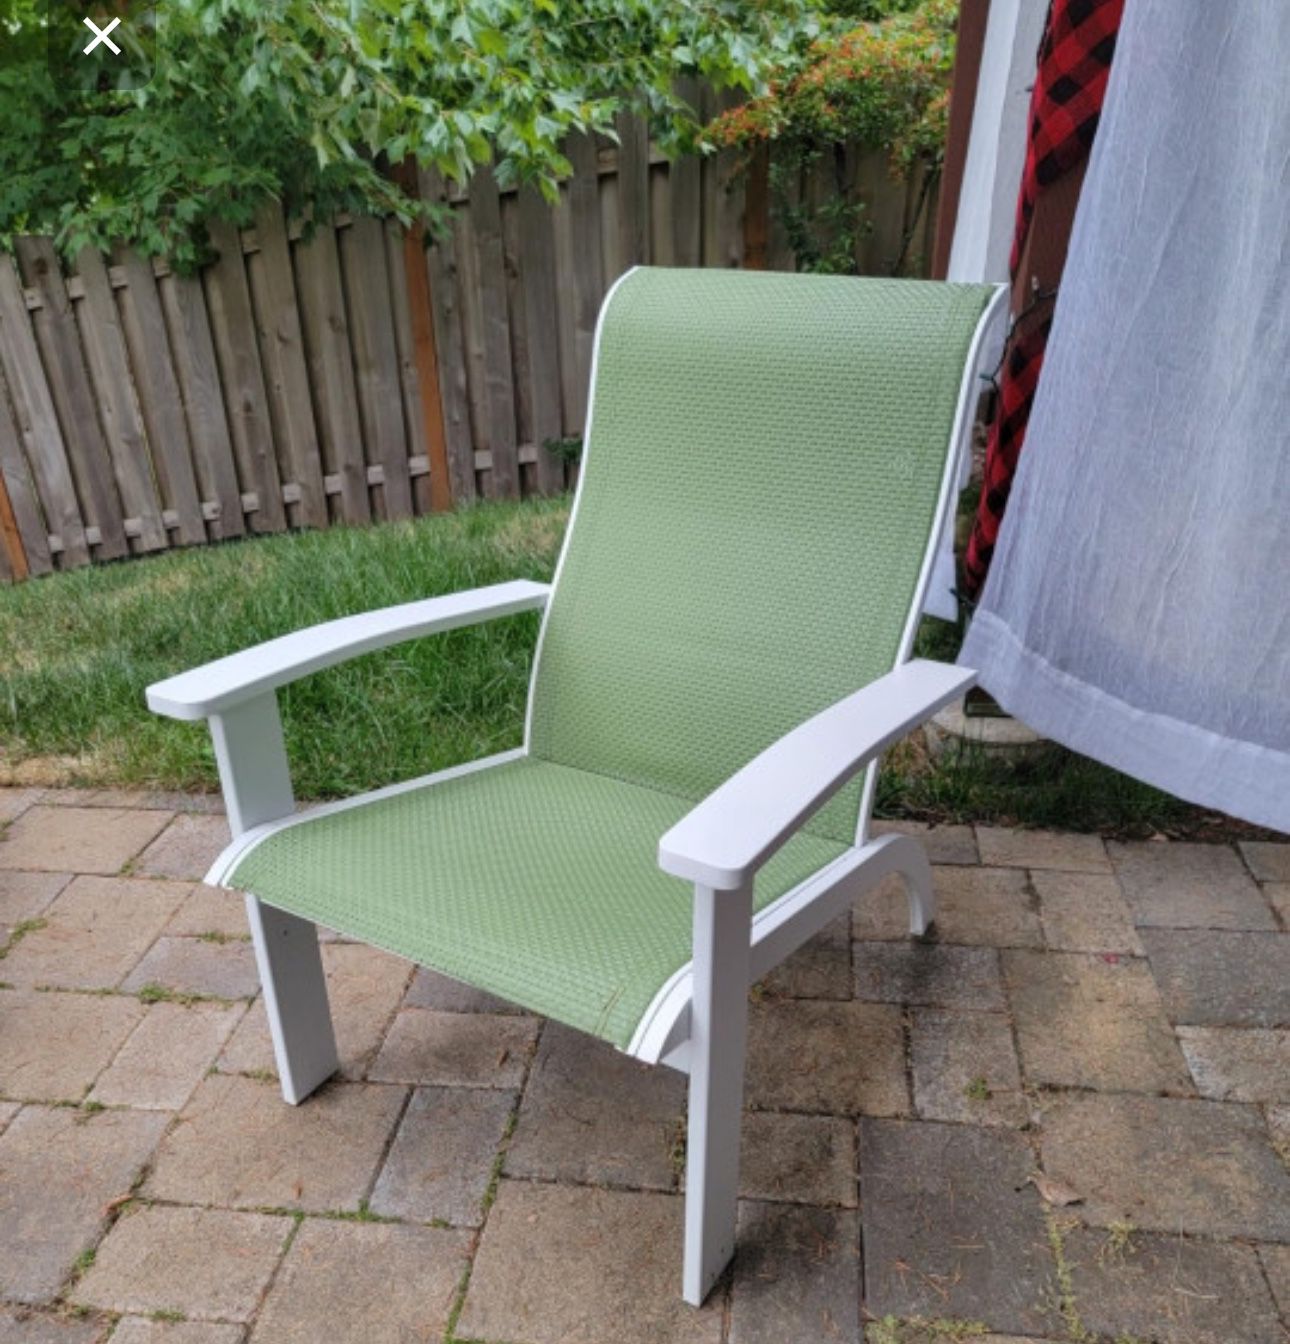 Adirondack Chair, Weather-Resistant Outdoor Furniture Lawn Chair New In Box!